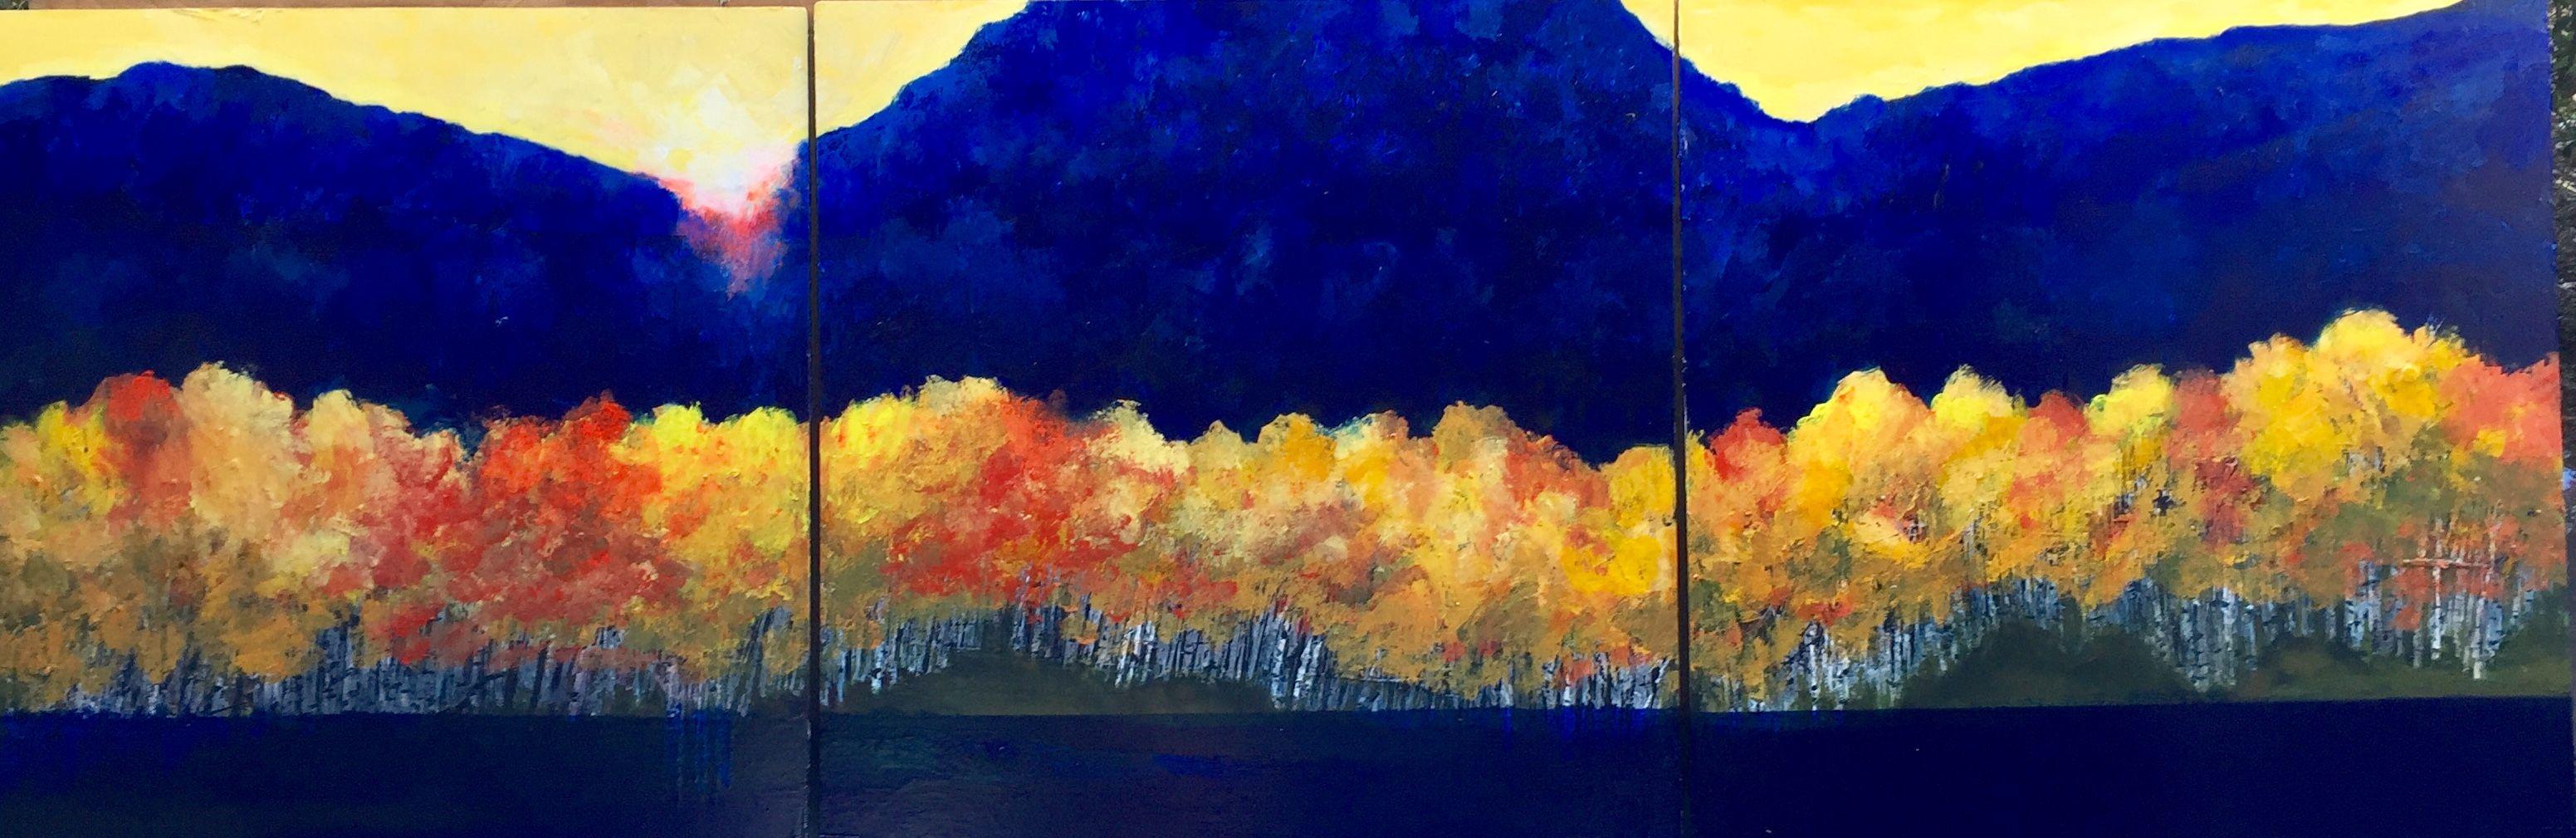 Simple yet strong celebration of fall foliage.  The newest addition to my Avenida de Los Arboles series.  This is an acrylic triptych done on aluminum panels that have no sides.  The panels are suspended from spacer bars that cause the piece to